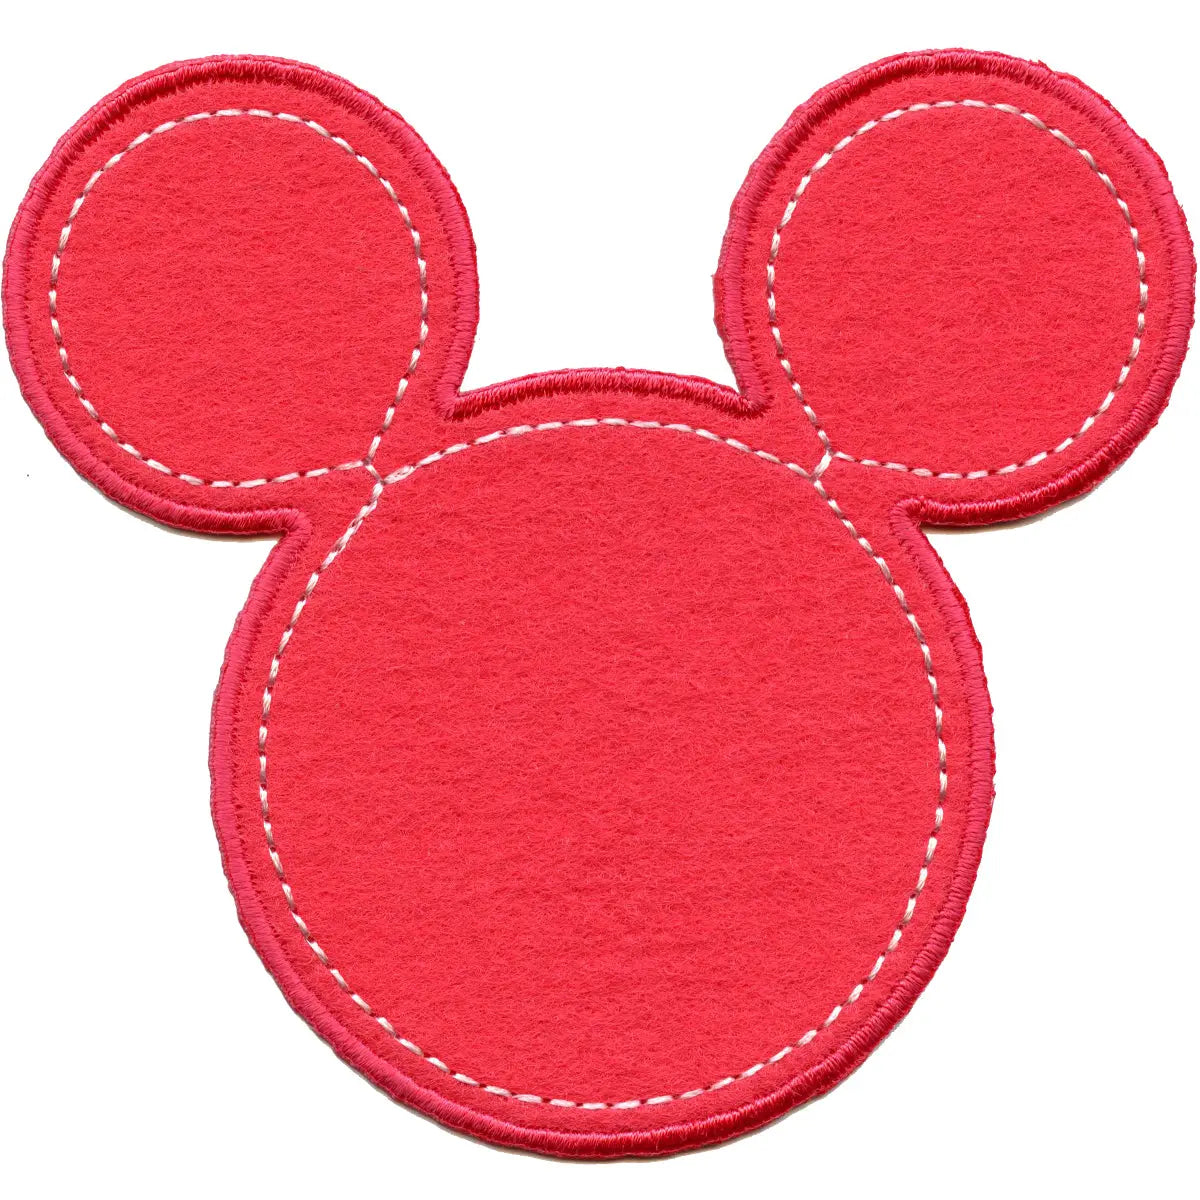 1 PC - 2 ⁵³/₆₄” Disney Minnie Mouse Iron On Embroidered Patches